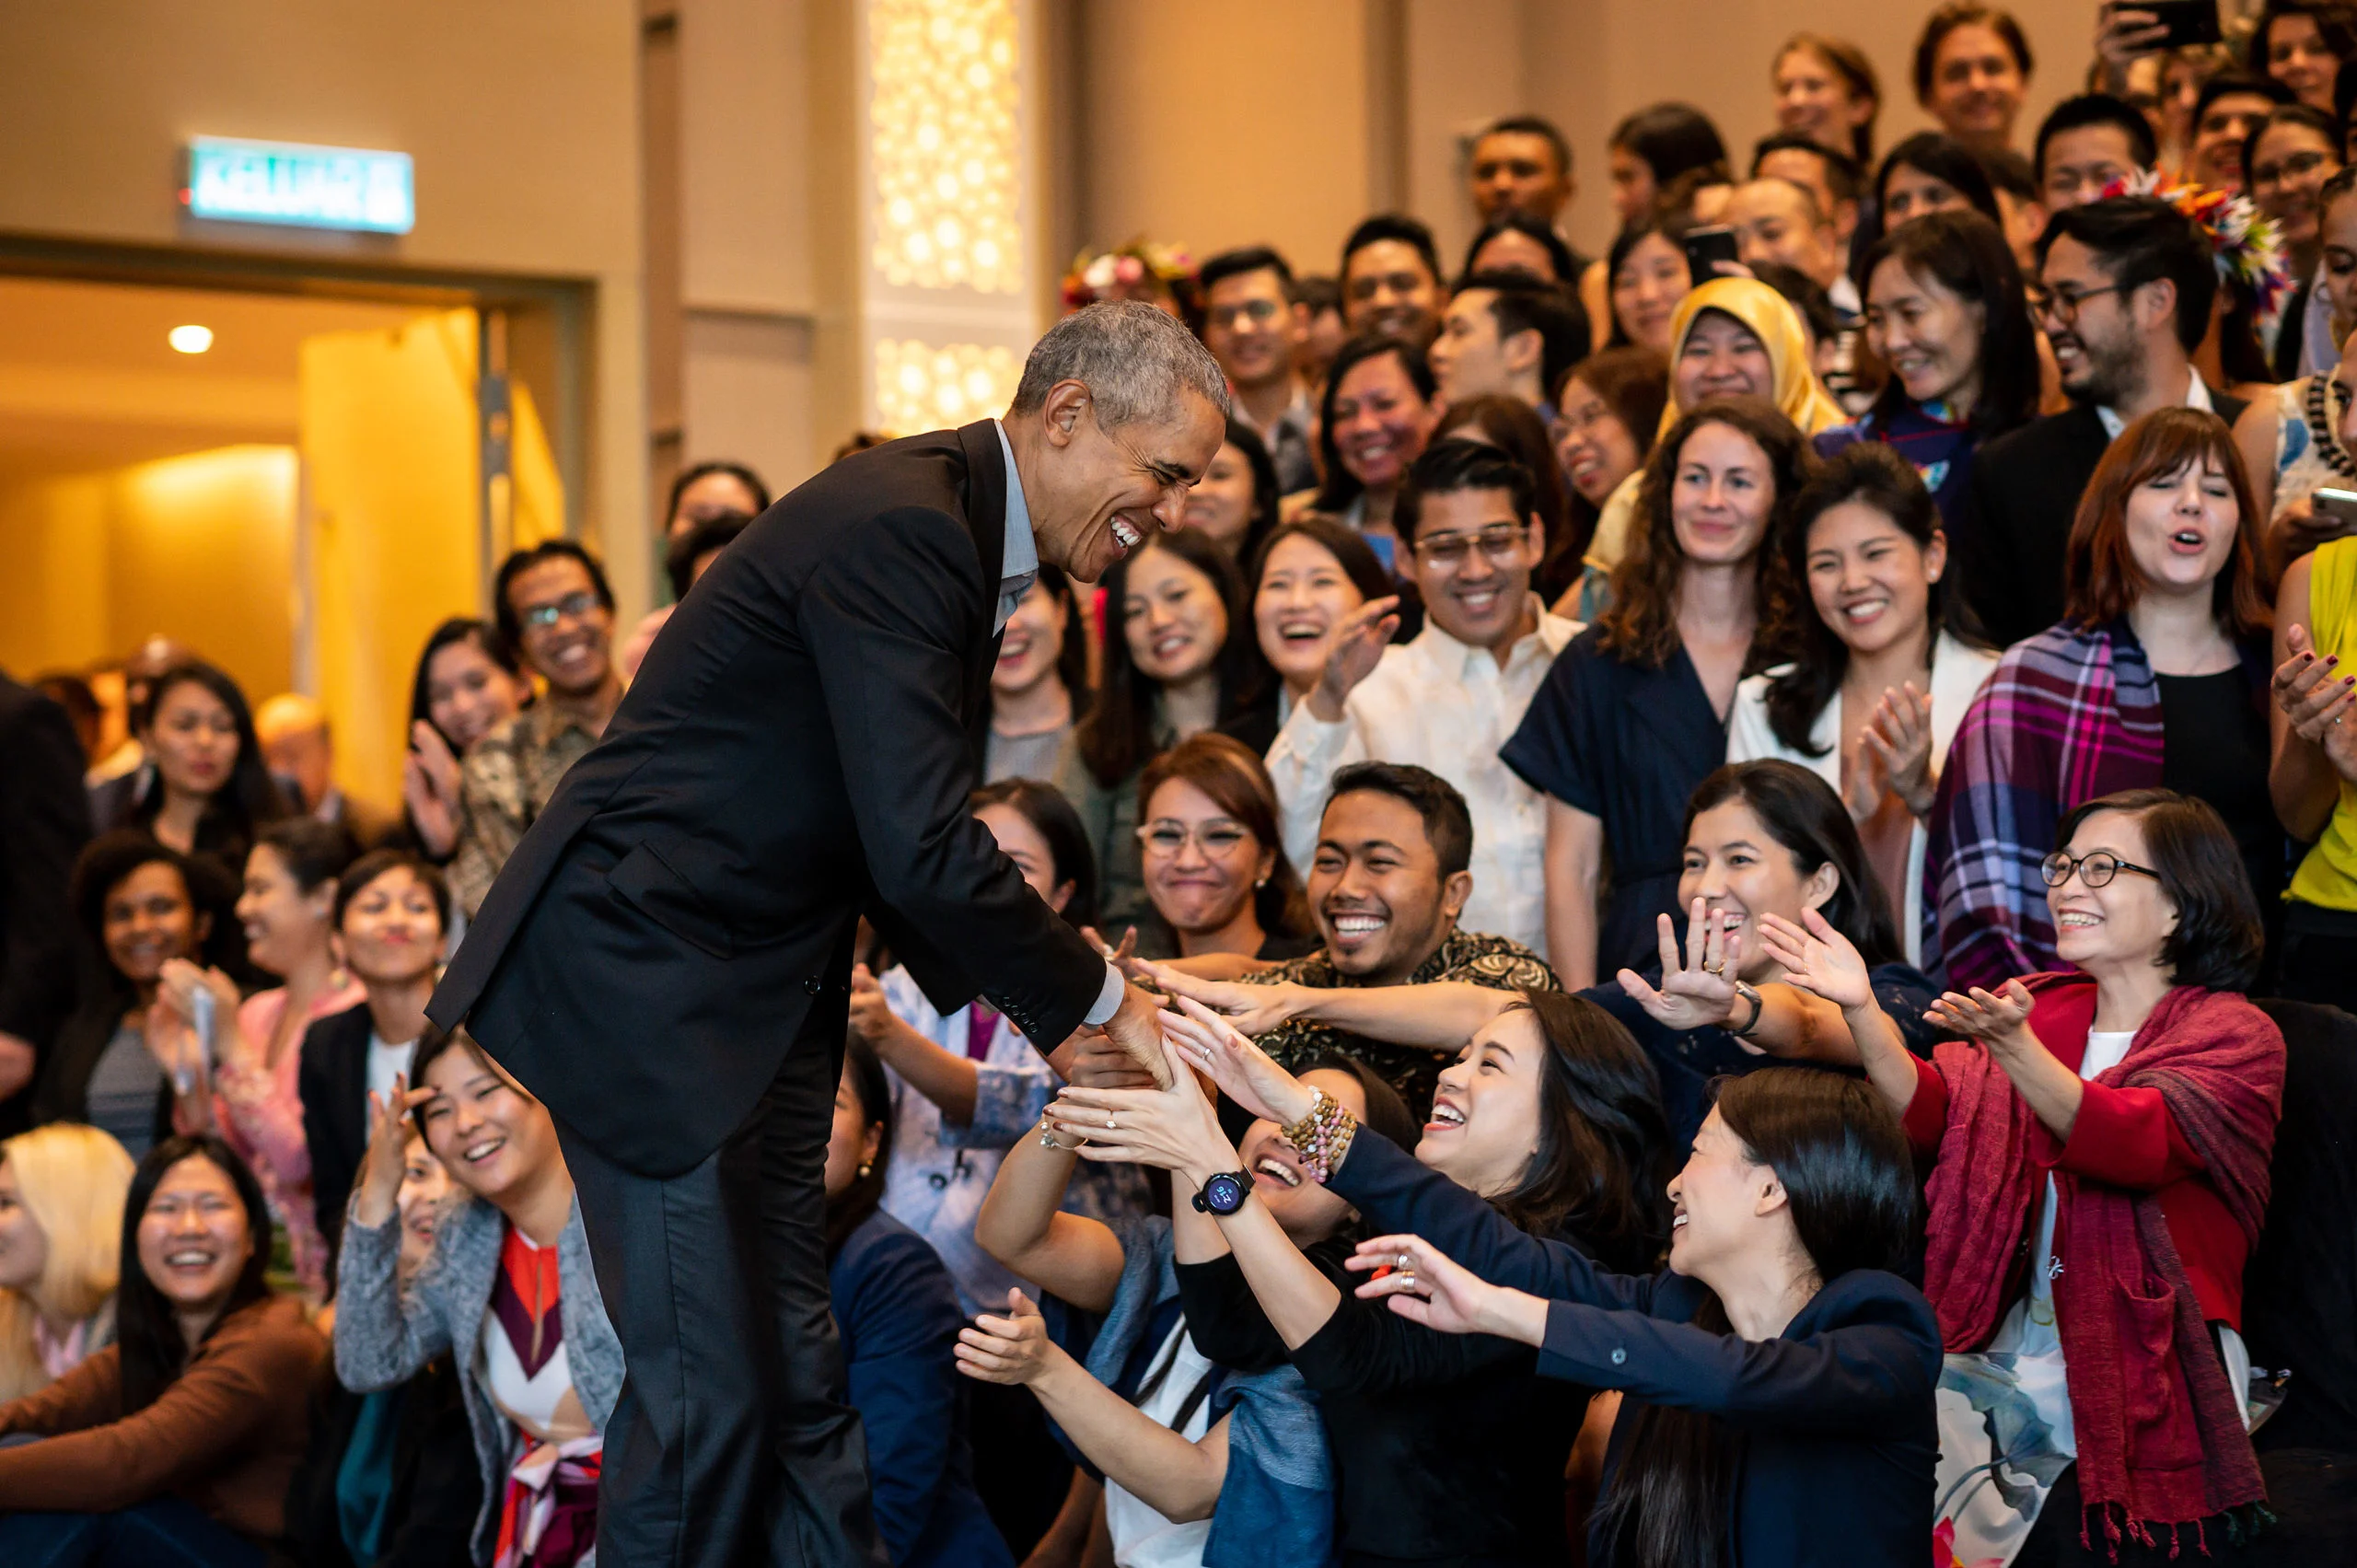 President Obama smiles as he shakes hands with an excited crowd of young people extend their hands.